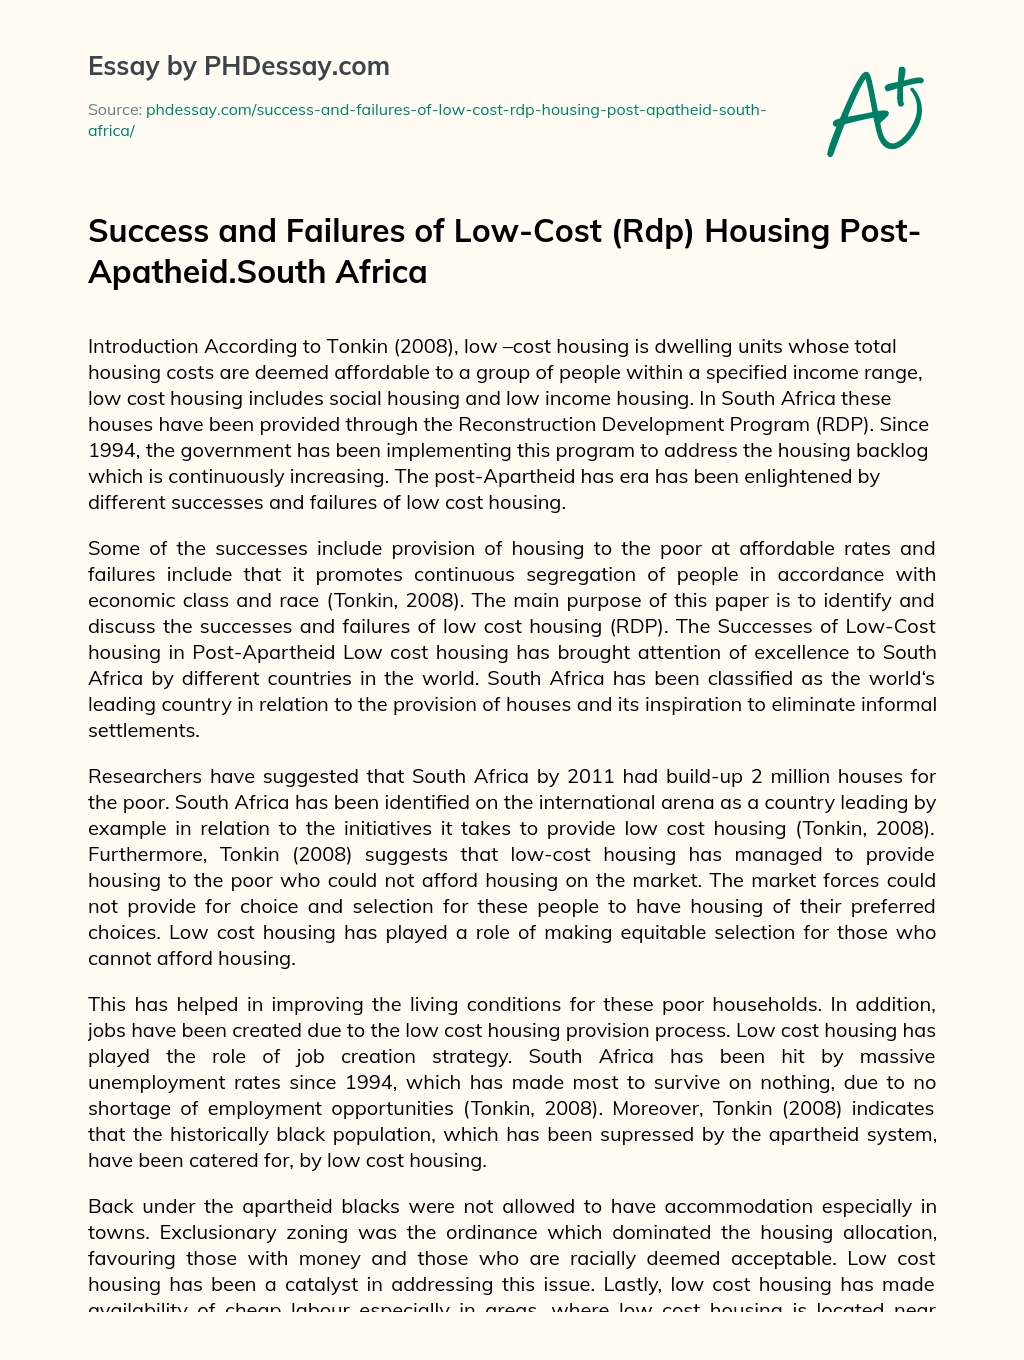 Success and Failures of Low-Cost (Rdp) Housing Post- Apatheid.South Africa essay